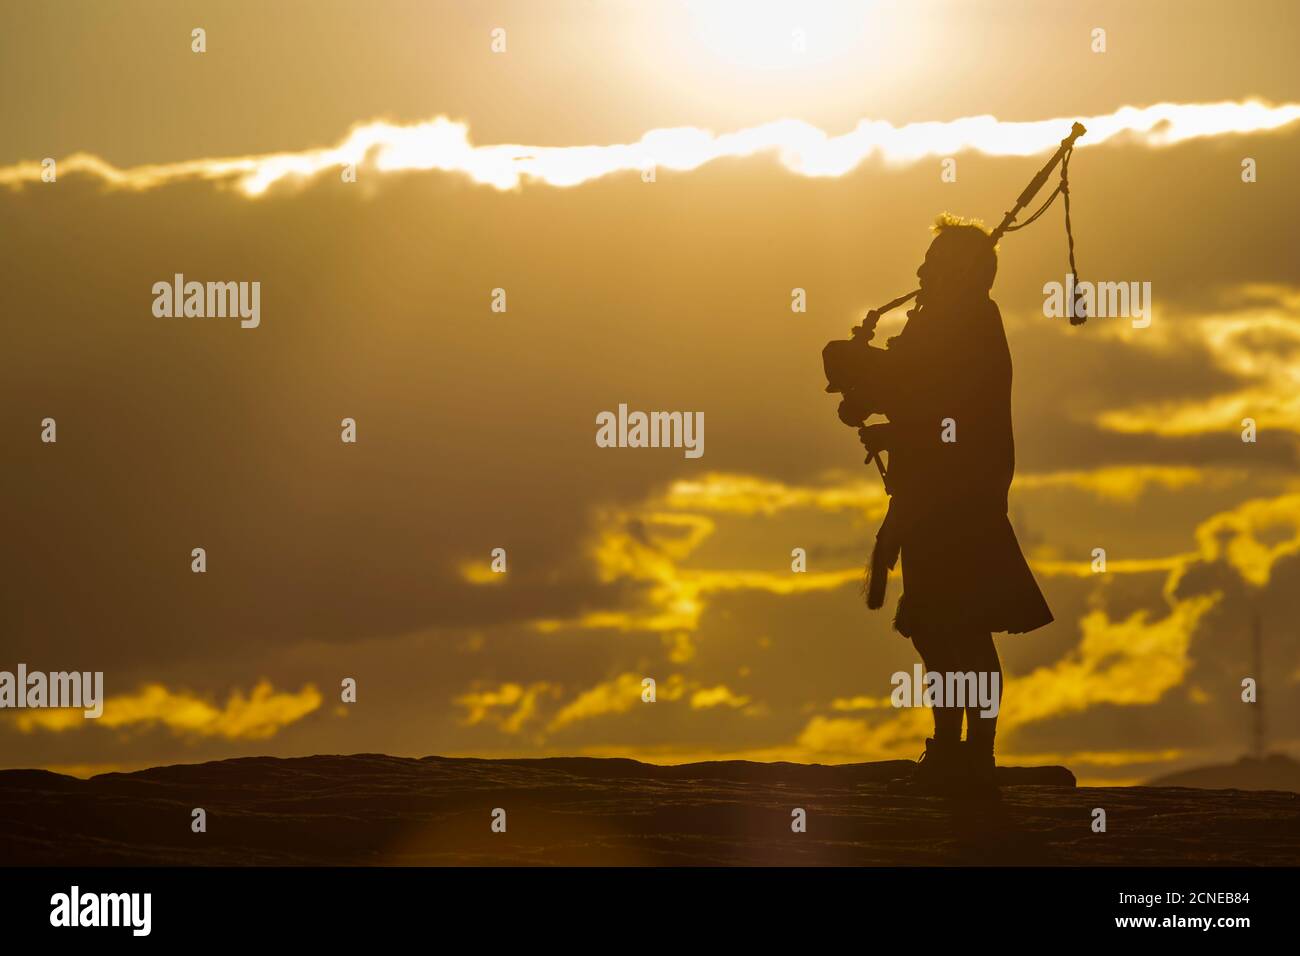 View of lone piper at at sunset on Curbar Edge, Curbar, Hope Valley, Peak District National Park, Derbyshire, England, United Kingdom, Europe Stock Photo